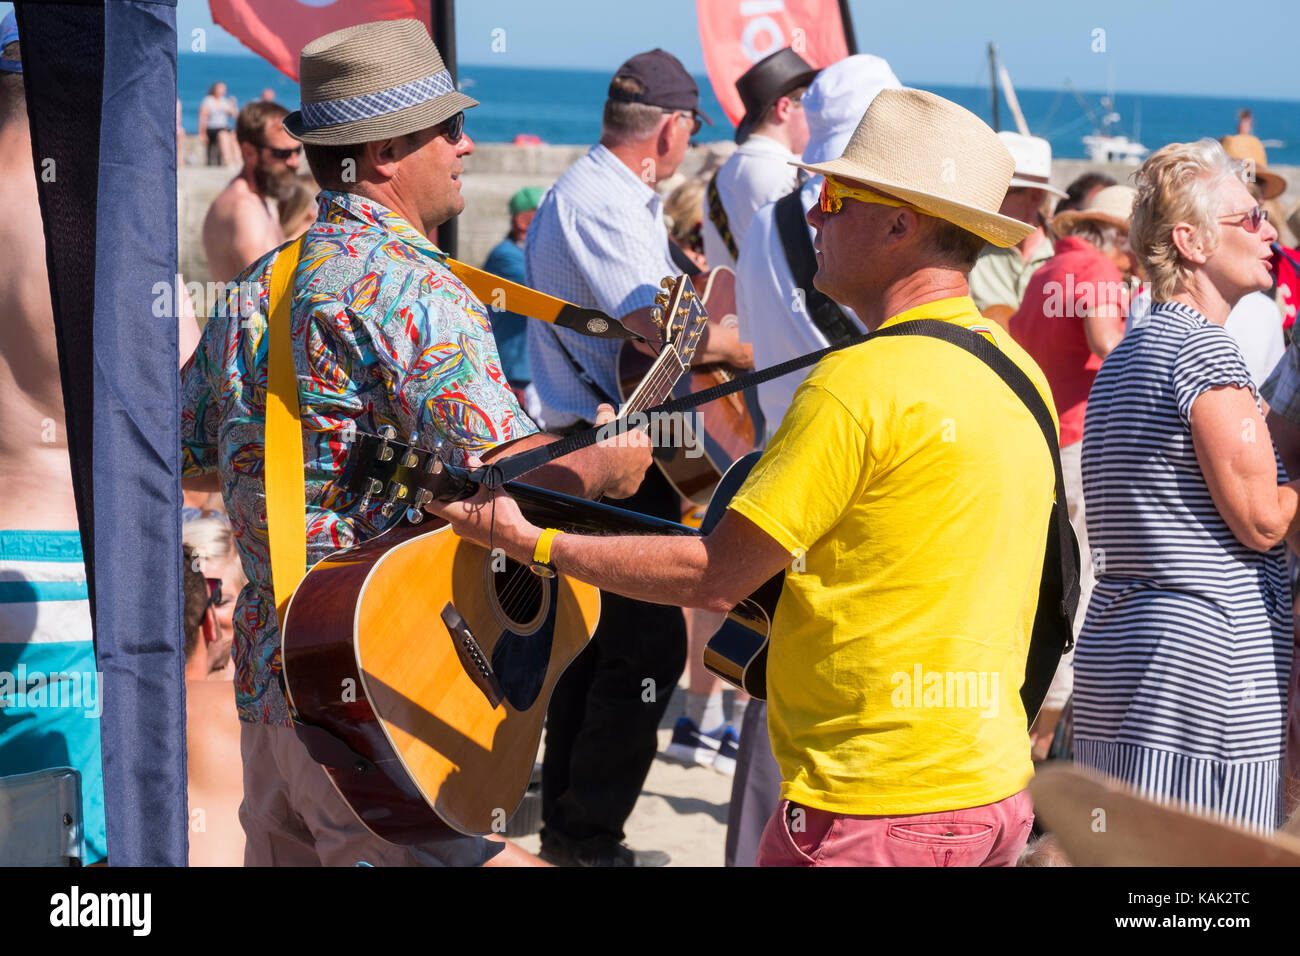 Guitarists playing at the Guitars on the Beach event at Lyme Regis, Dorset, UK. Stock Photo